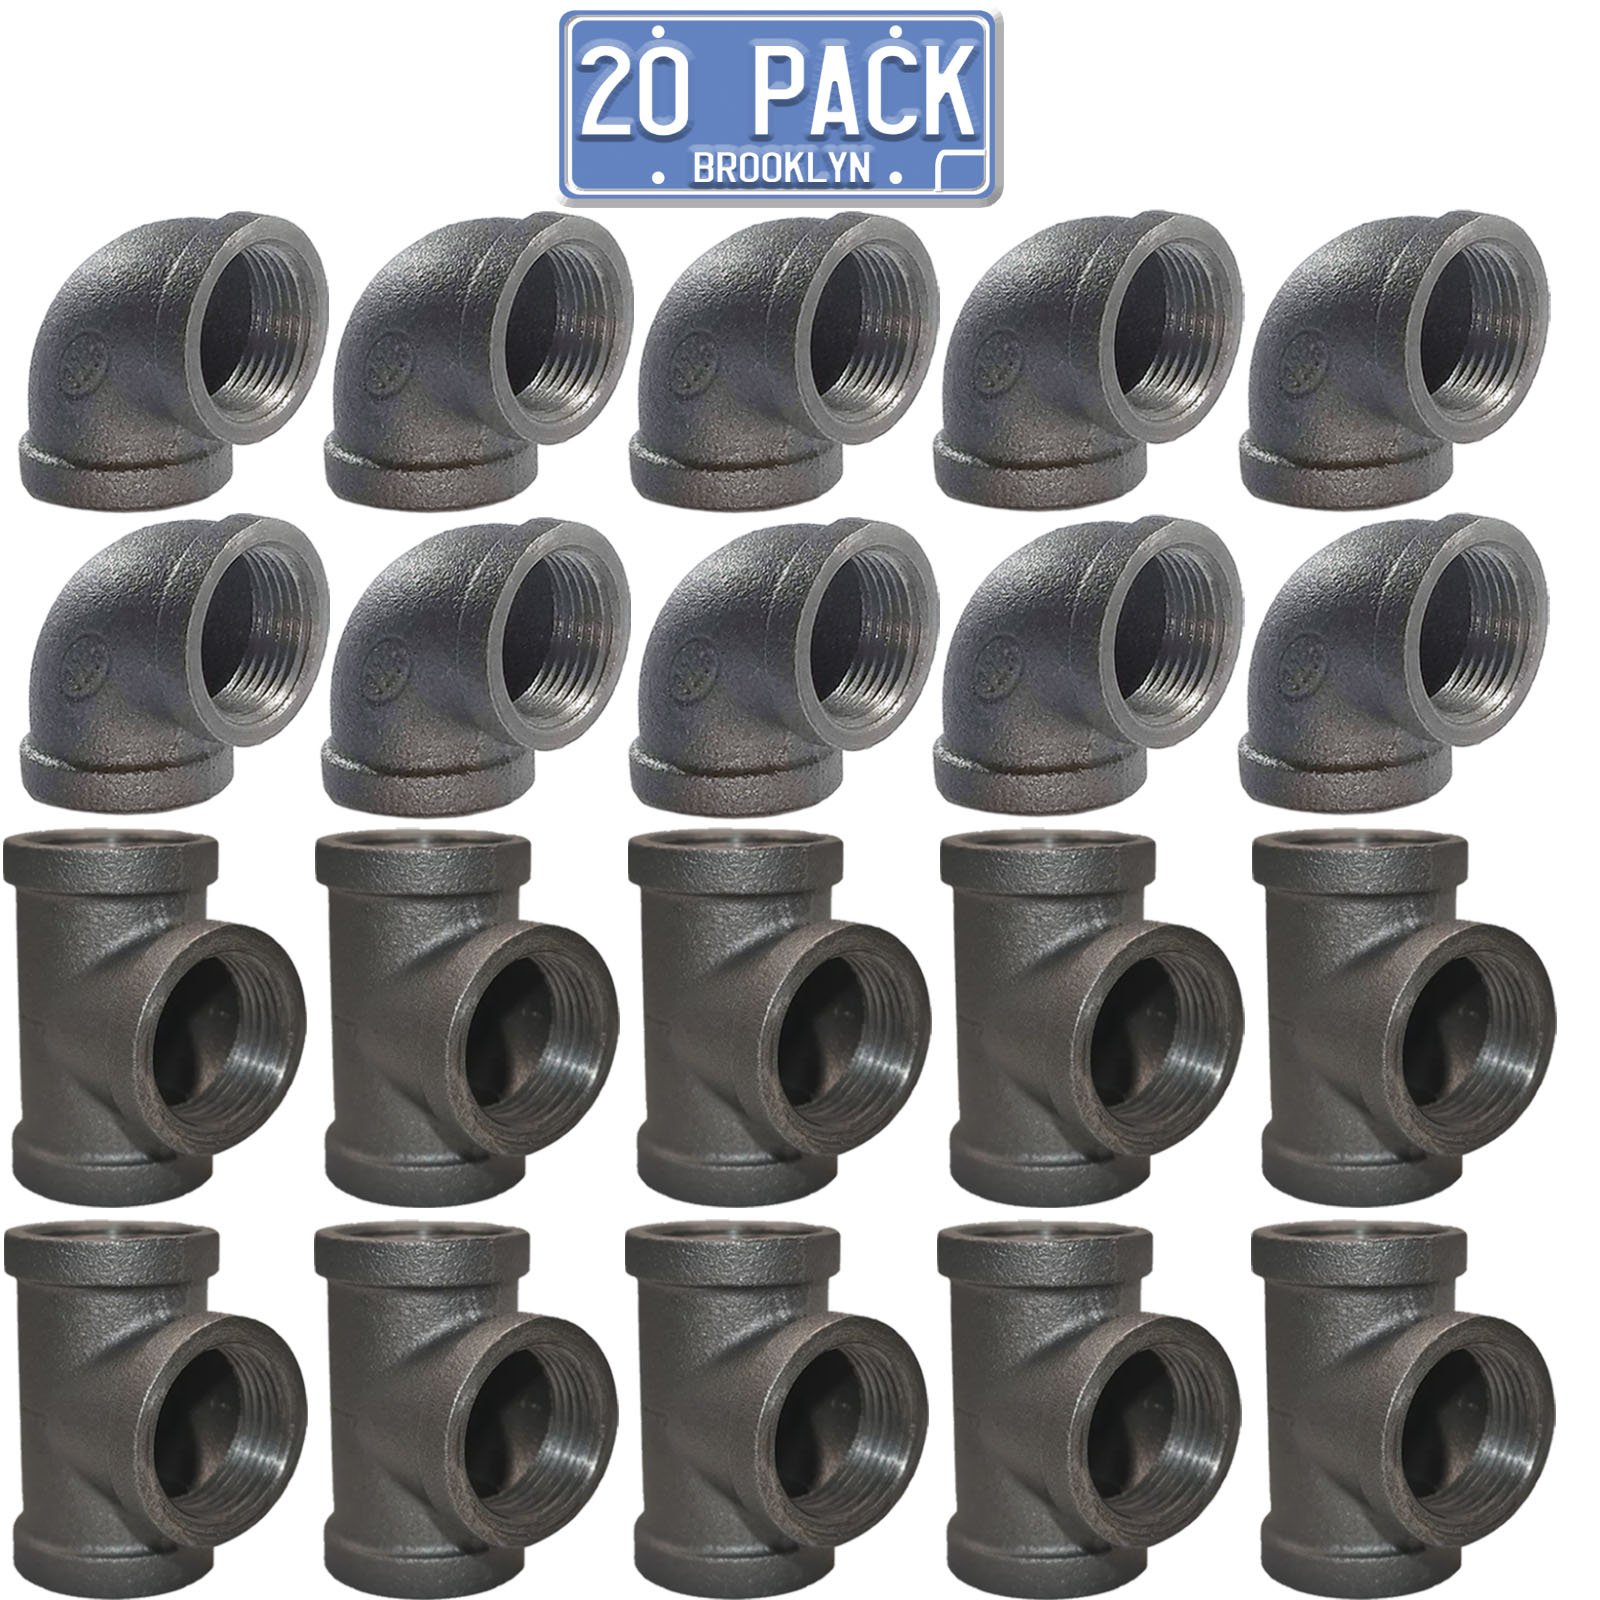 Brooklyn Pipe 1/2 Pipe Fitting Combo Pack - 10 Pipe Elbows, 10 Pipe Tees for DIY Projects - image 1 of 7